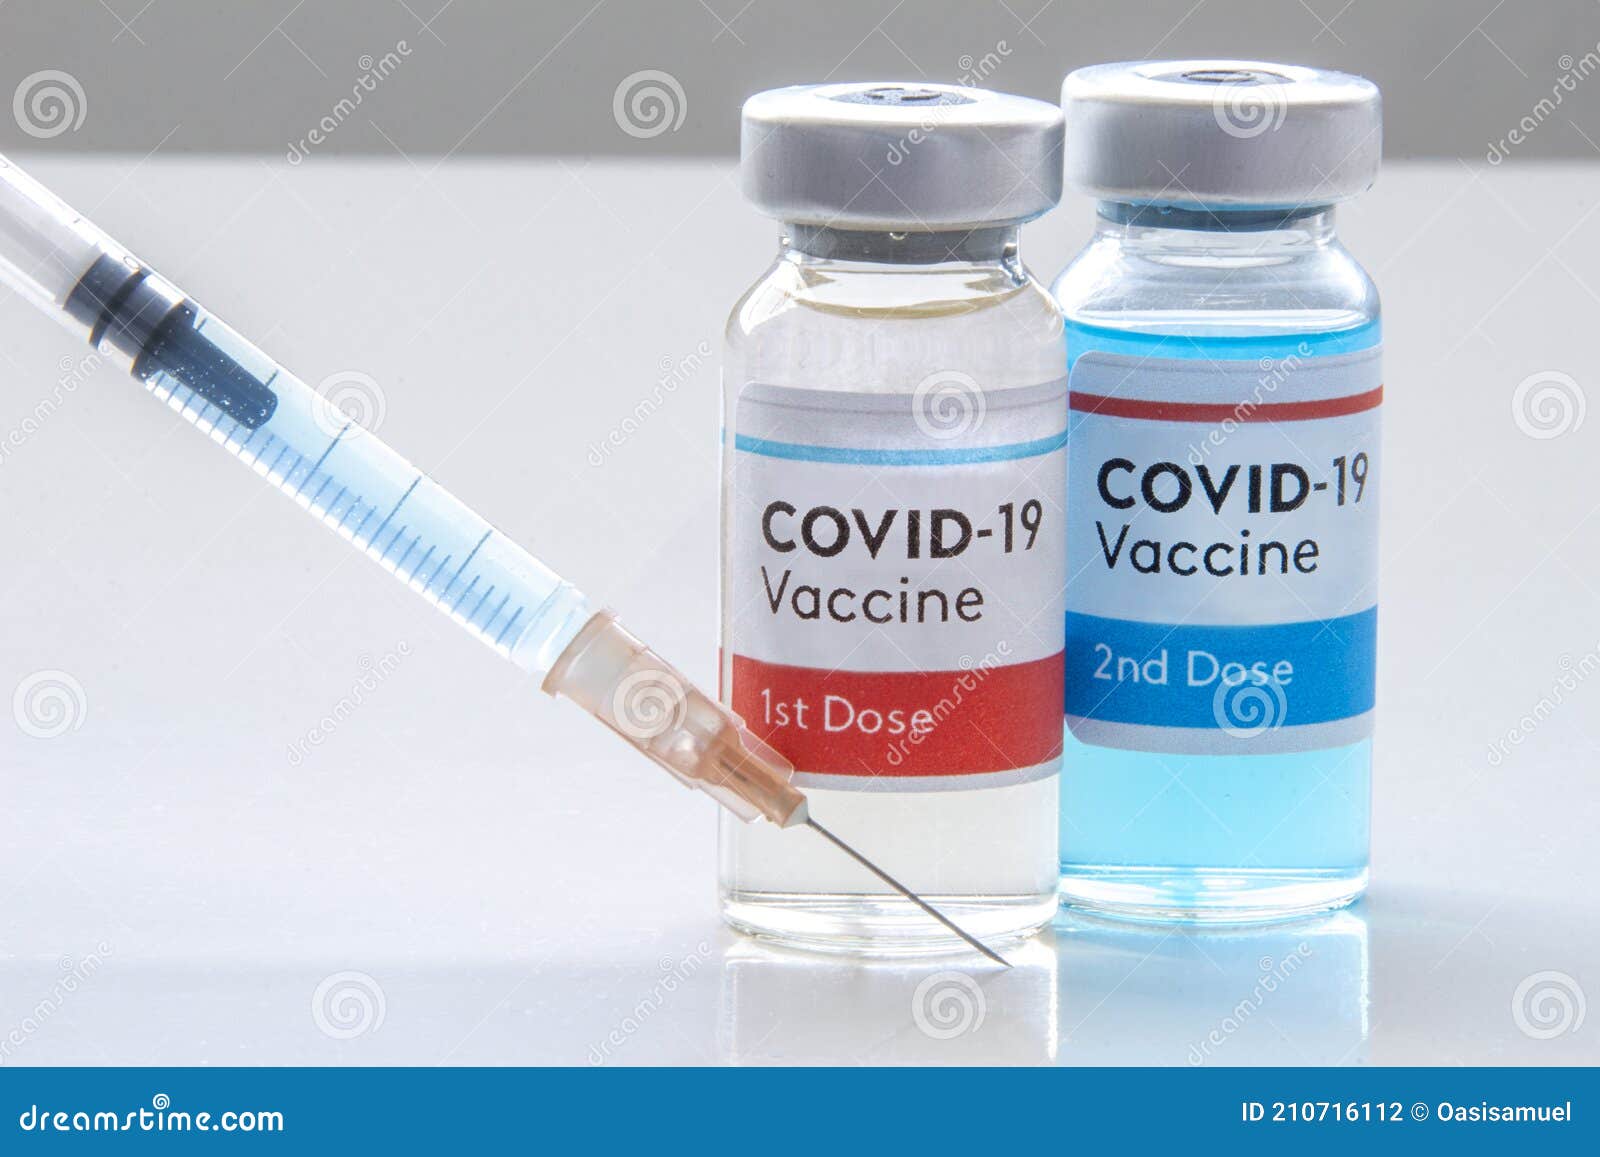 1st dosis and a 2nd dosis of covid-19 vaccine on a vial bottle and injection